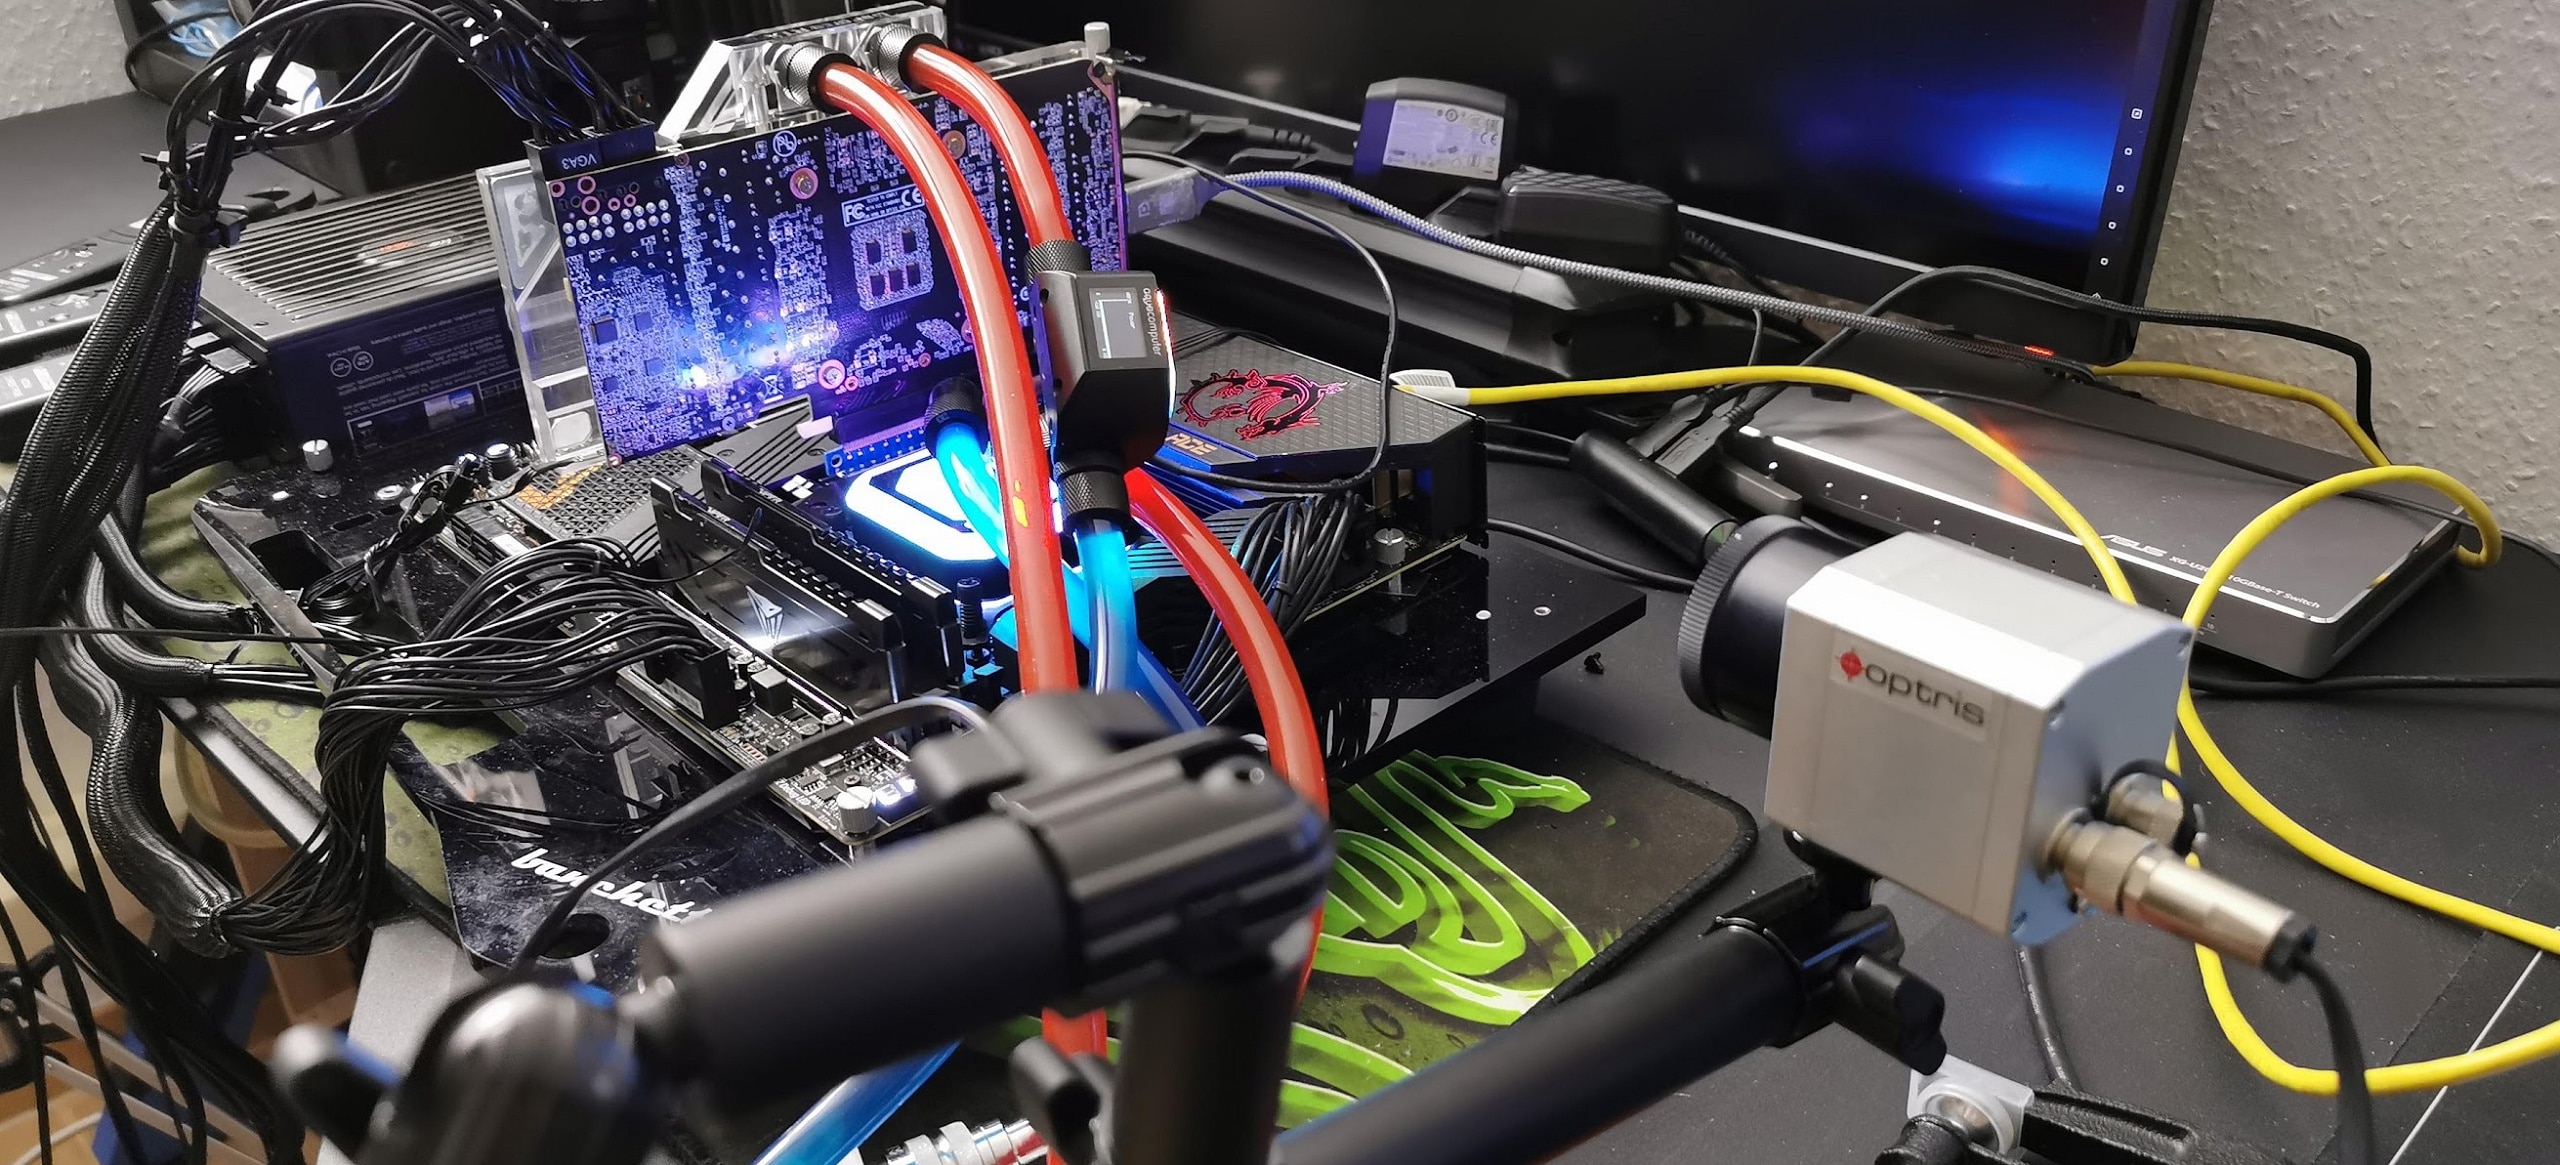 Thermal conductivity pad tests on the NVIDIA GeForce RTX 3080 - Four reference pads and brutal temperature drops of the hot GDDR6X up to 50%!